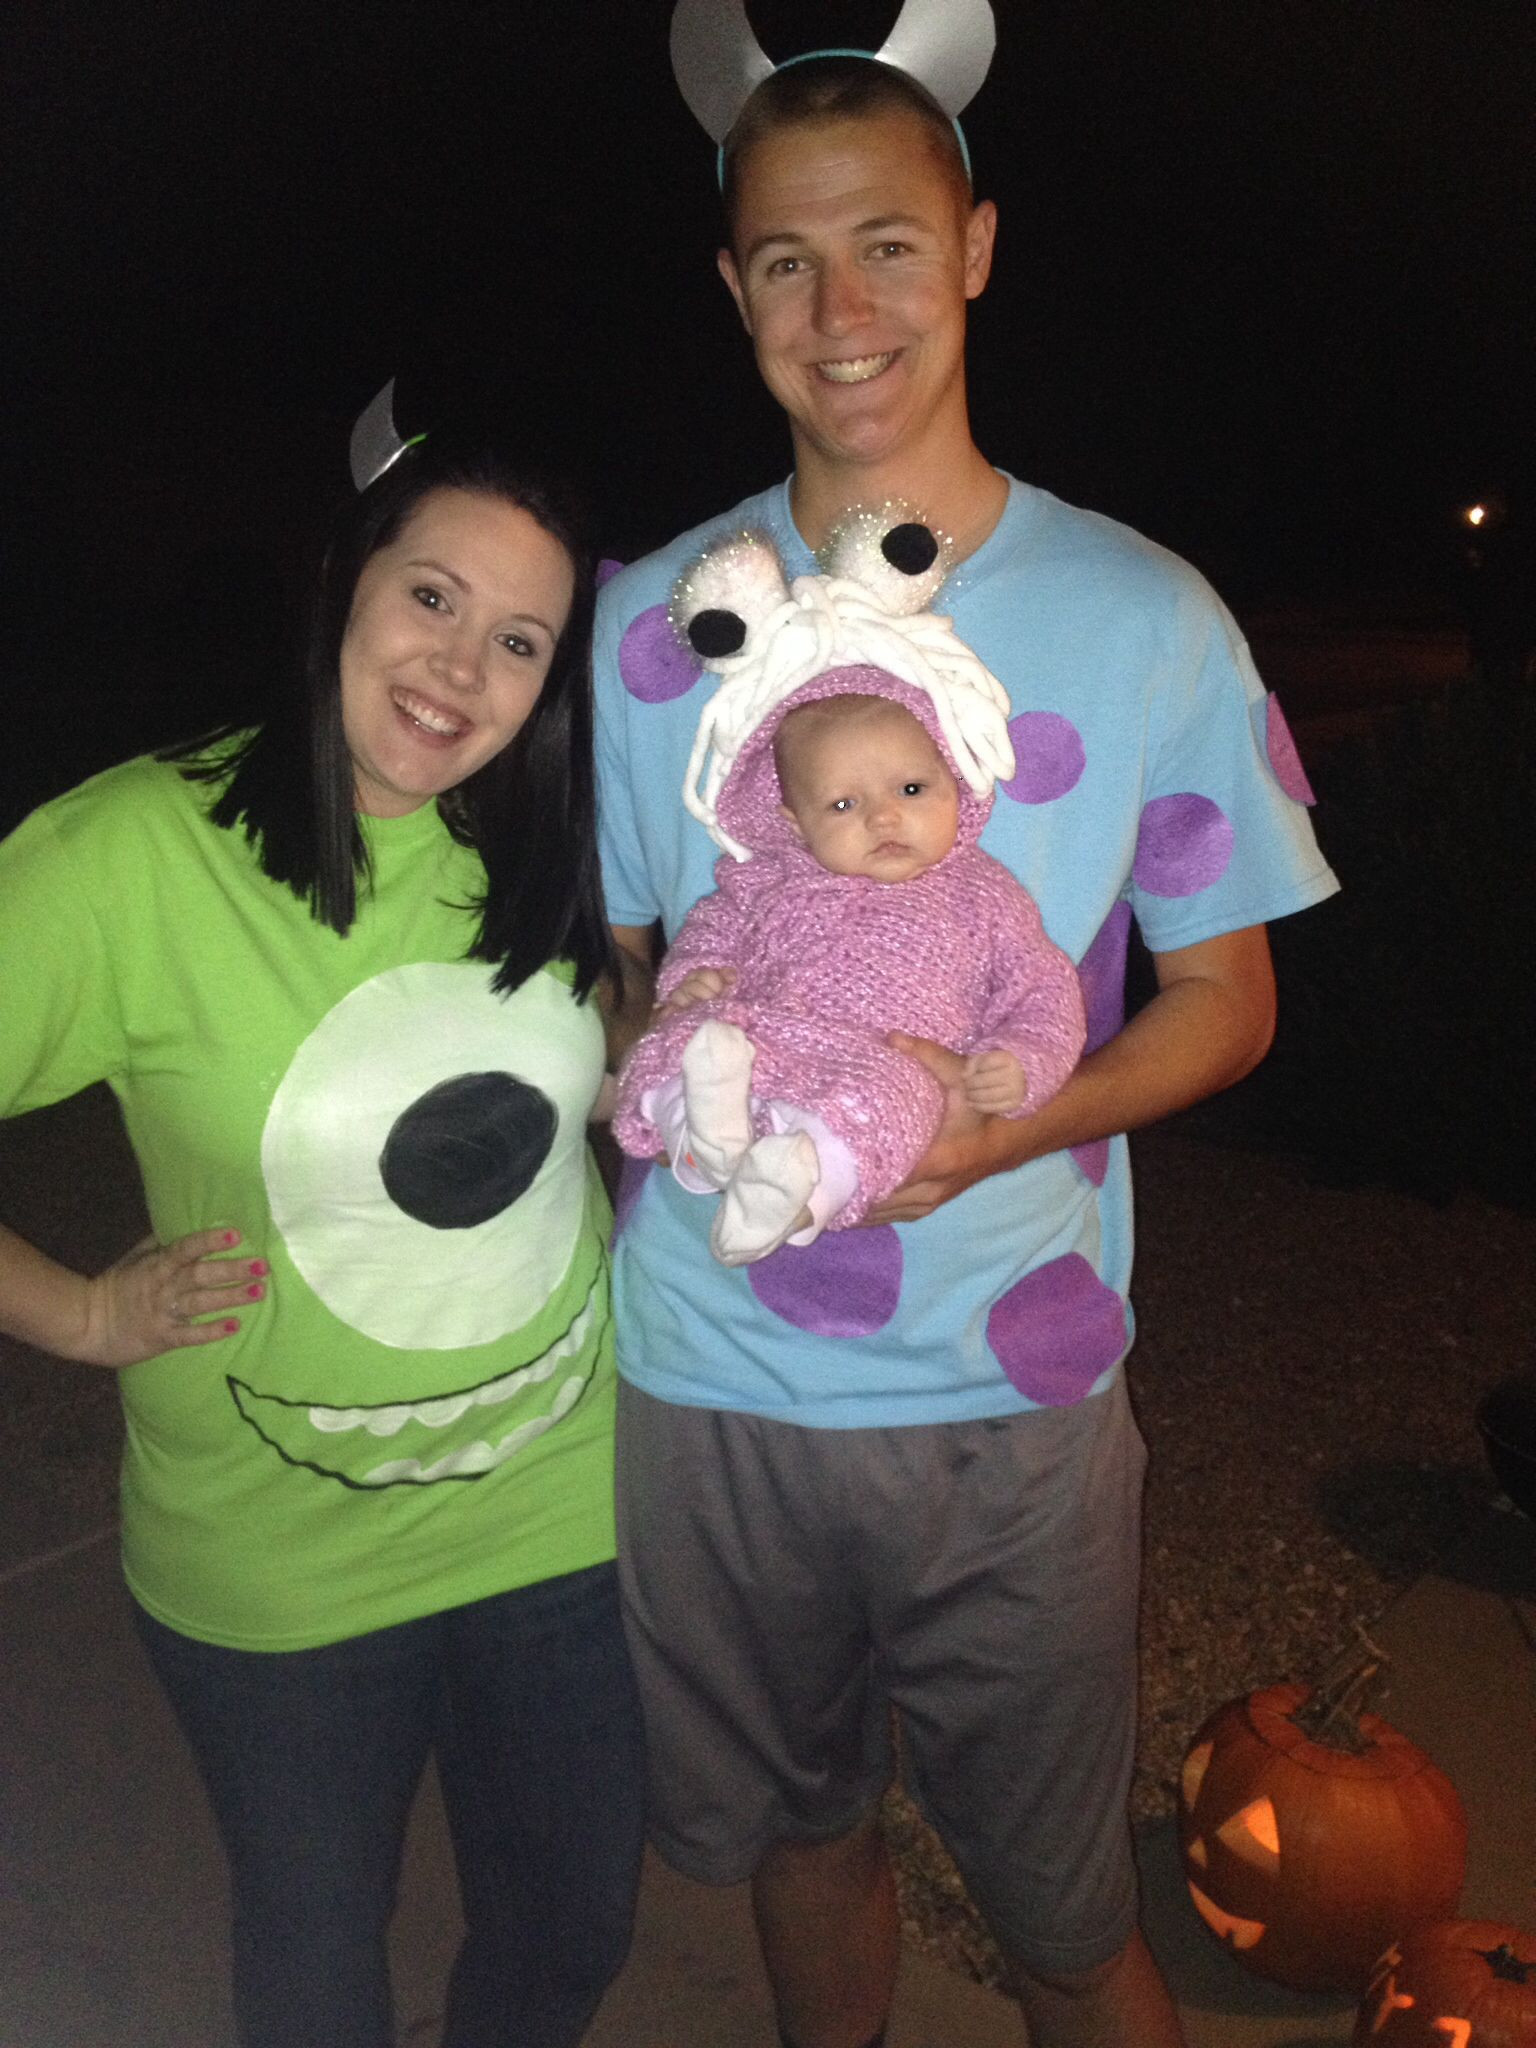 Sully Monsters Inc Costume DIY
 Monsters Inc family Halloween costume Mike Sully And Boo